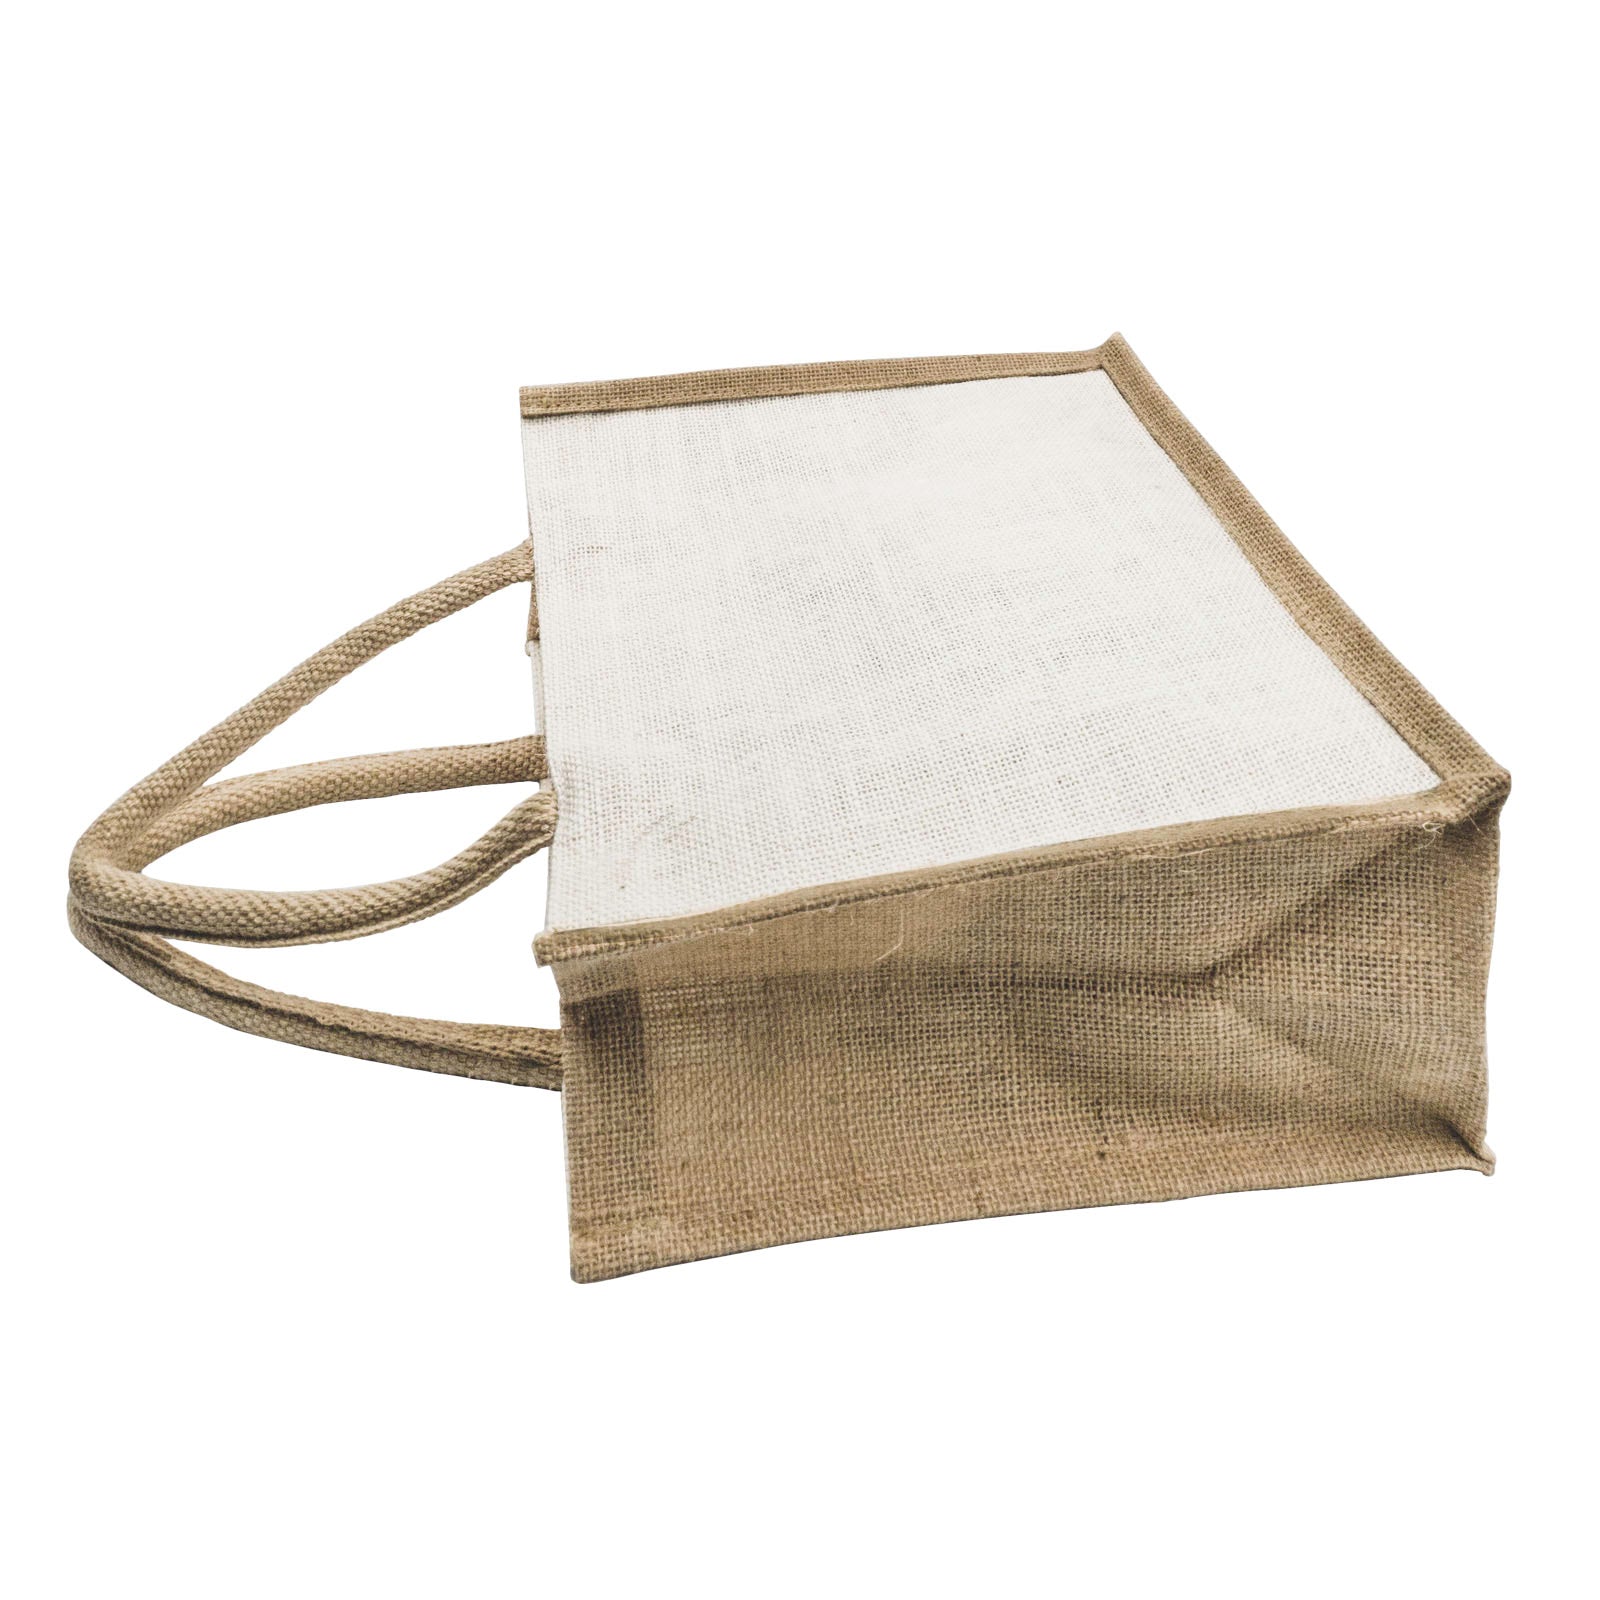 White Jute Hand Bag with Brown Border